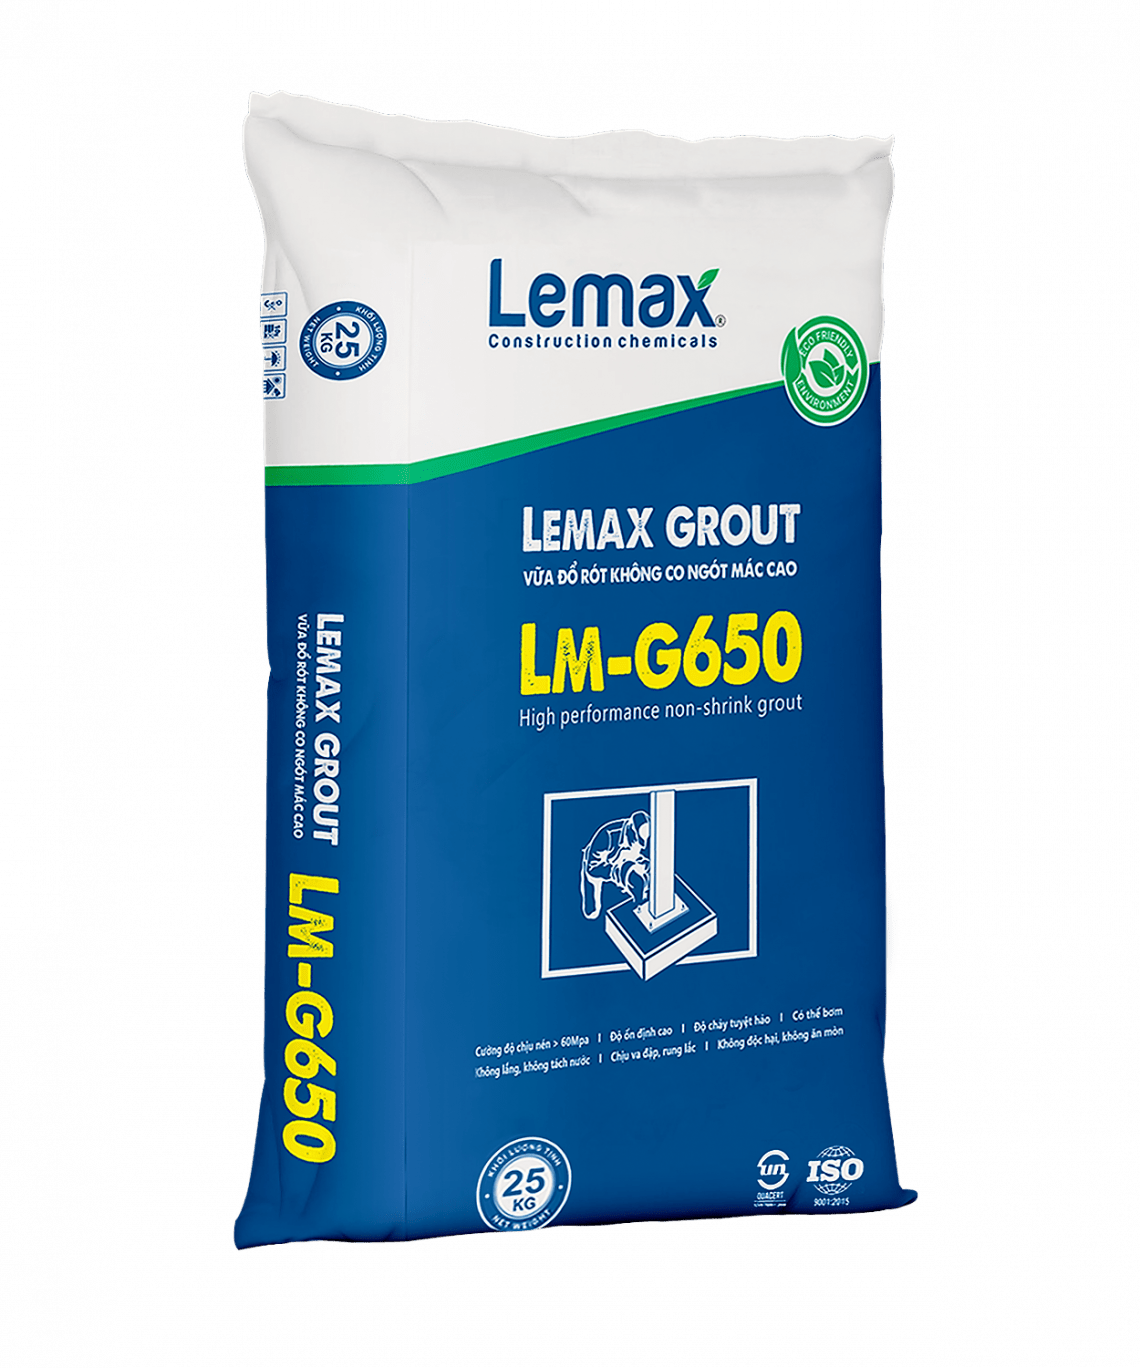 Lemax Grout LM G650 1140x1368 1